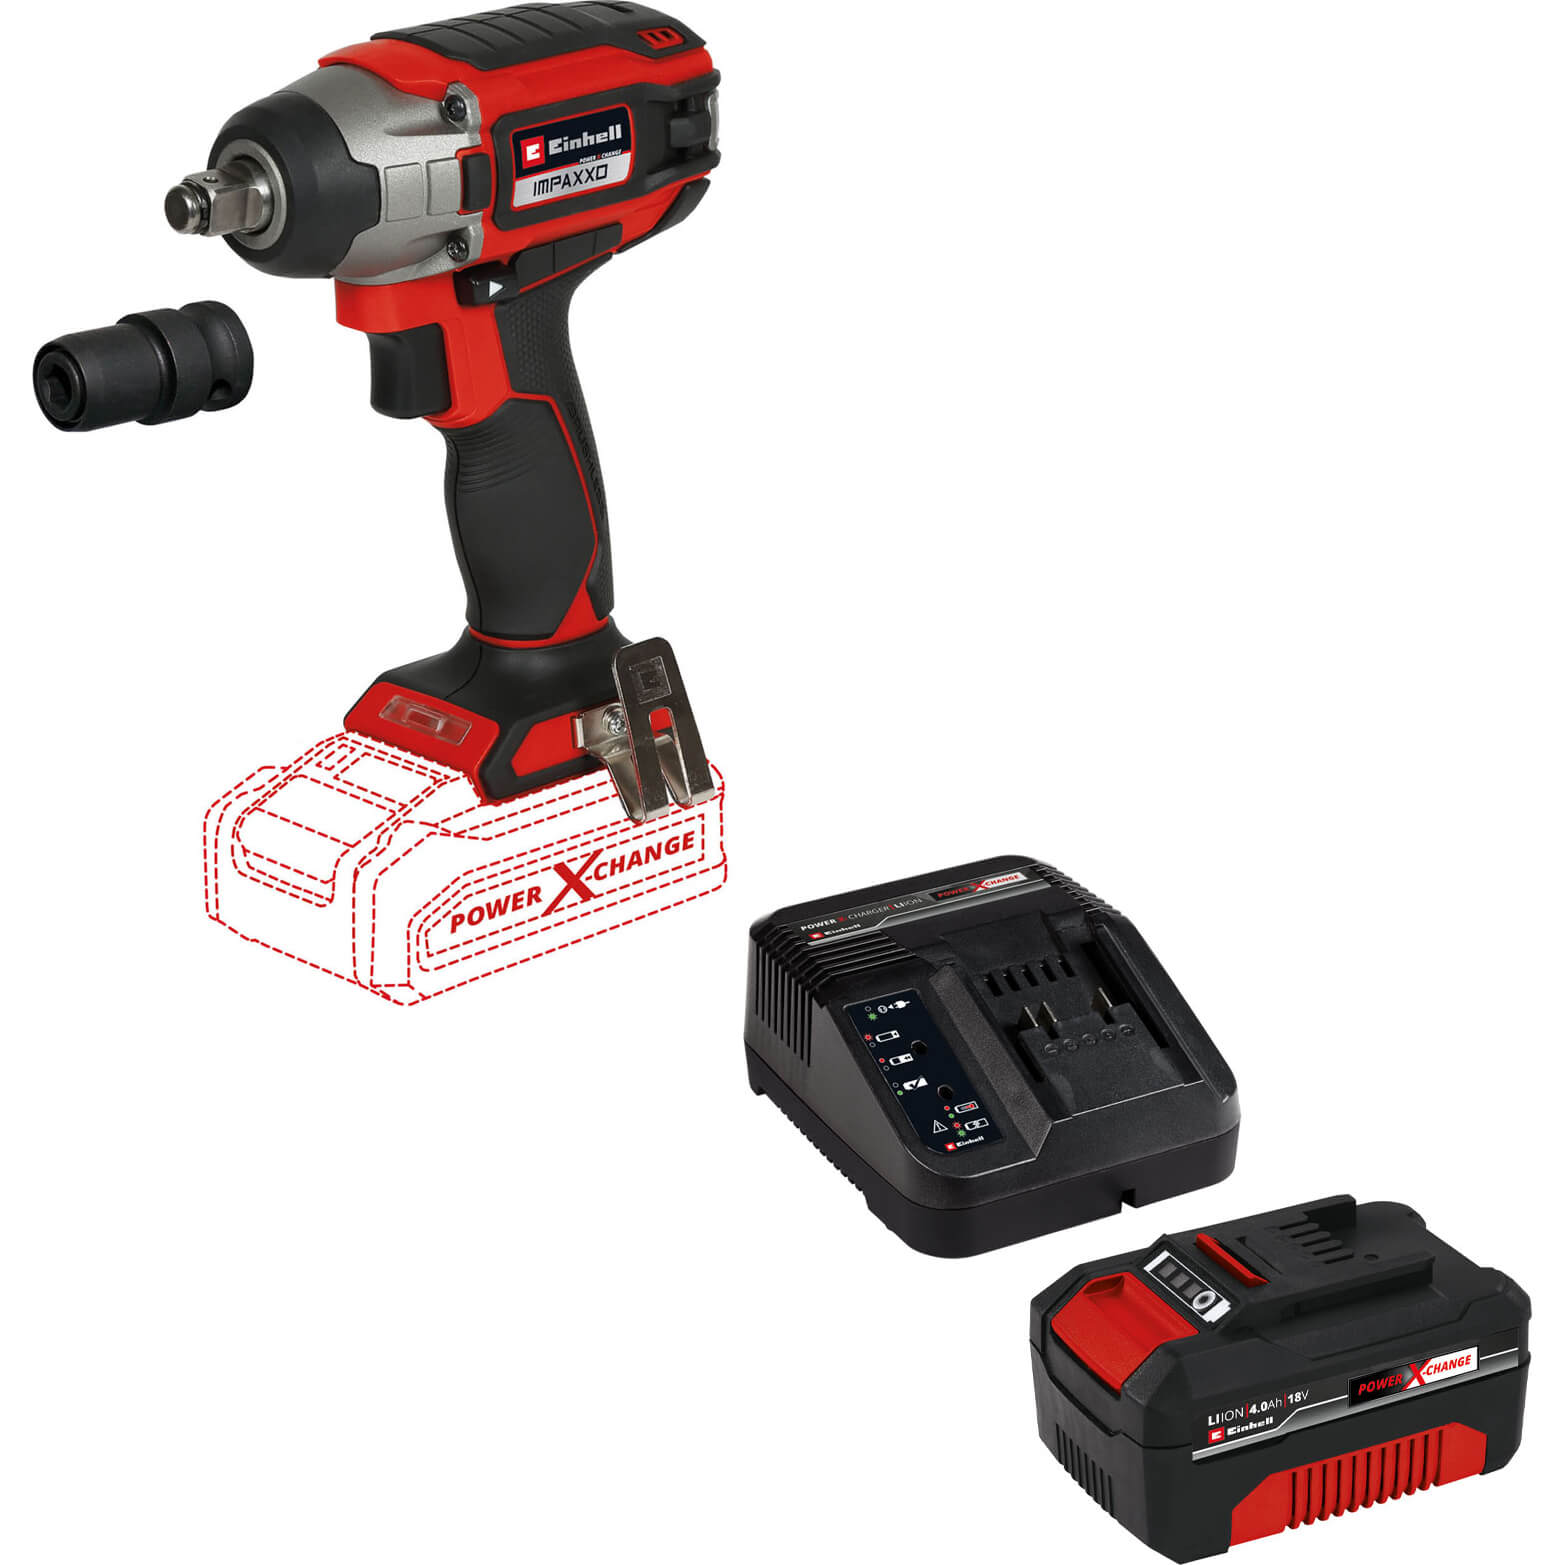 Image of Einhell IMPAXXO 18/230 18v Cordless Brushless 1/2" Impact Wrench 1 x 4ah Li-ion Charger No Case